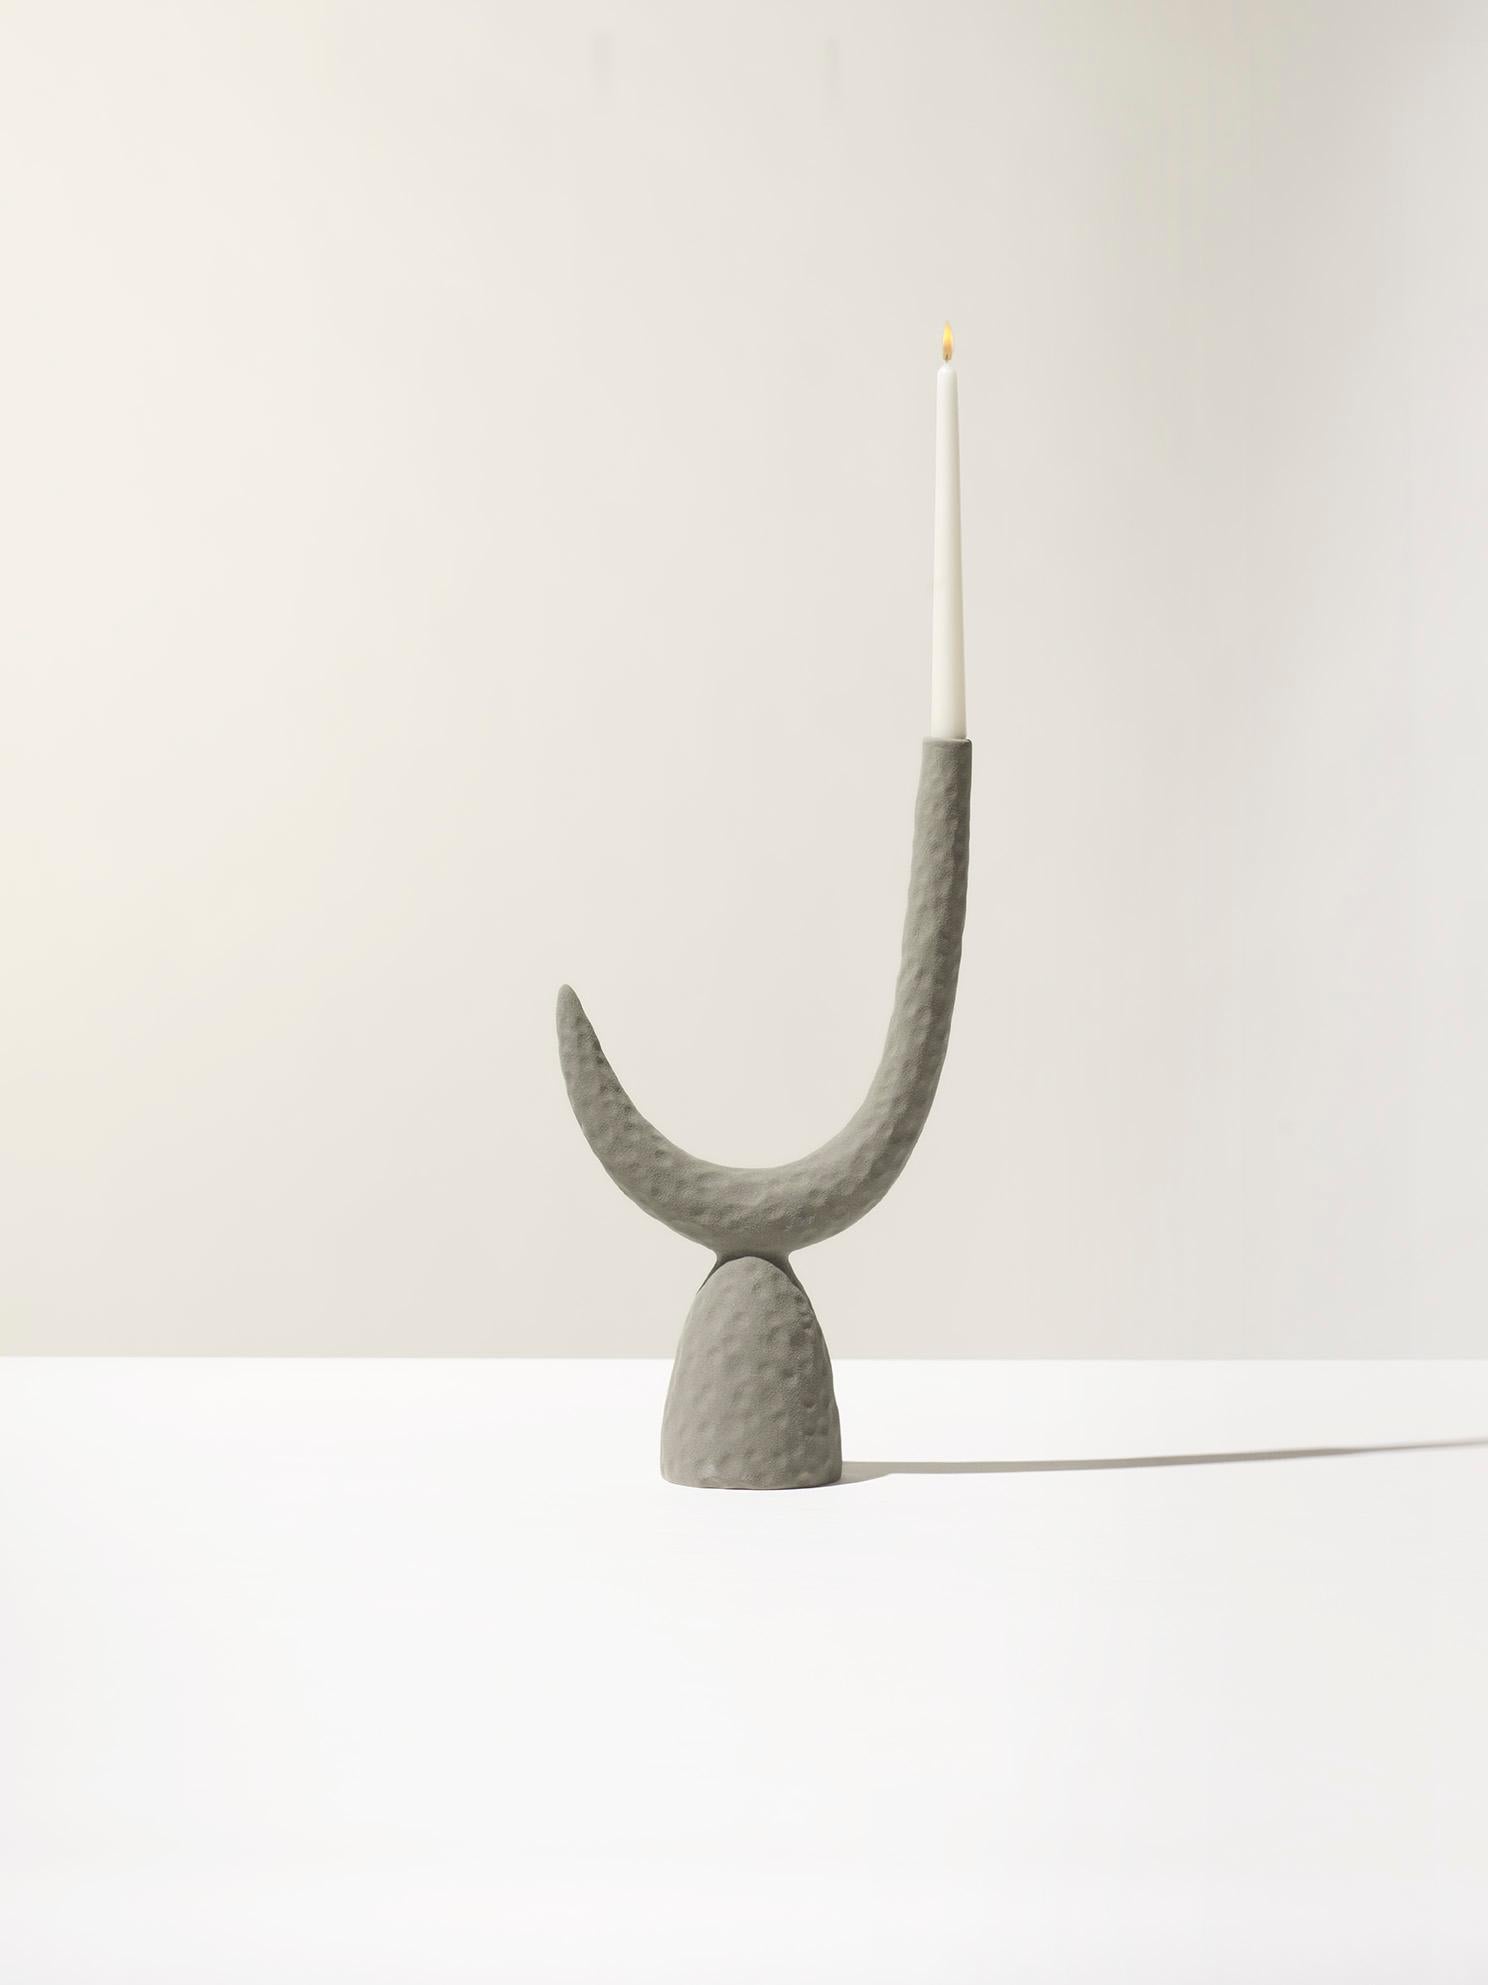 Made in Italy candlestick, in light grey matt color, this pottery peace was designed by Andrea Anastasio at the historical Bottega Cercamica Gatti 1928 in Faenza, Italy, specialized on creating ceramic art, that goes perfect for people passionate on